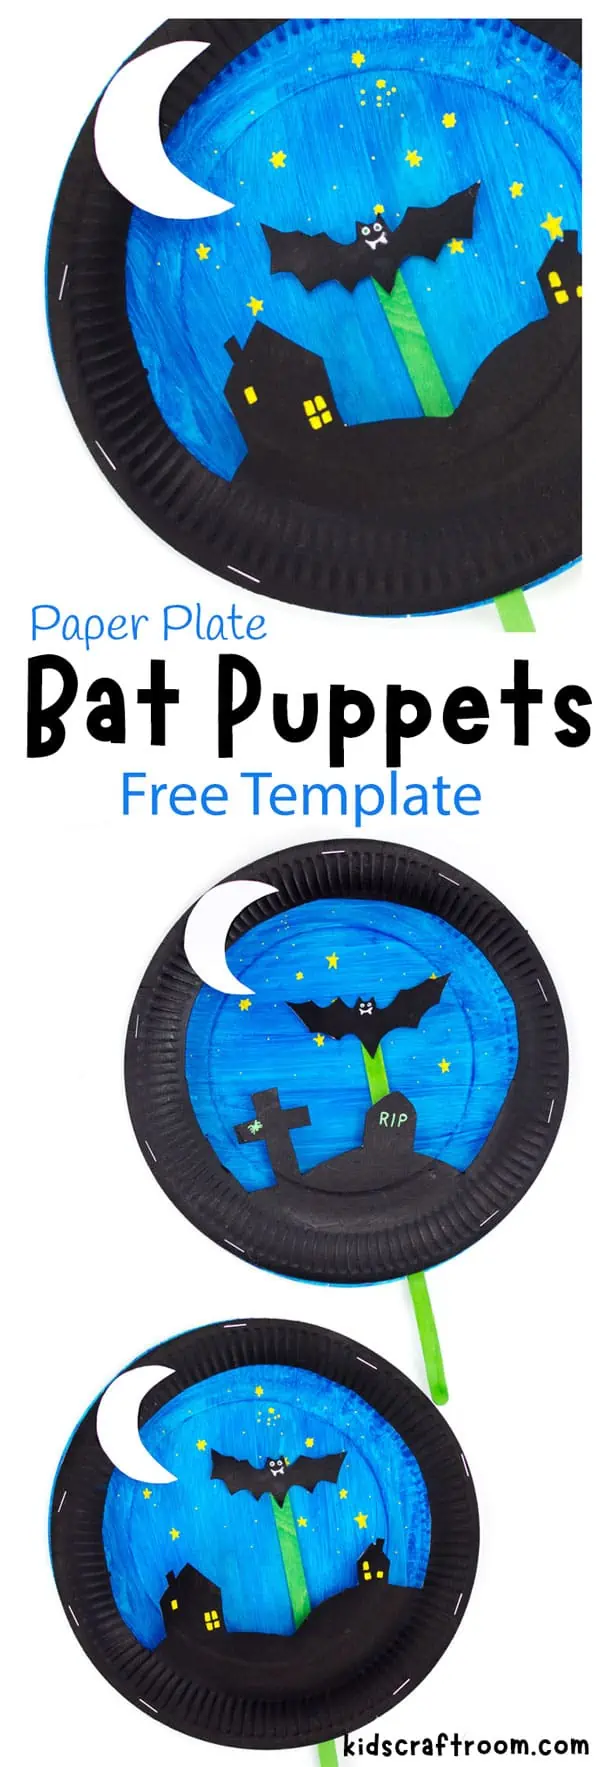 A collage showing 3 paper plate bat puppets, overlaid with descriptive text.